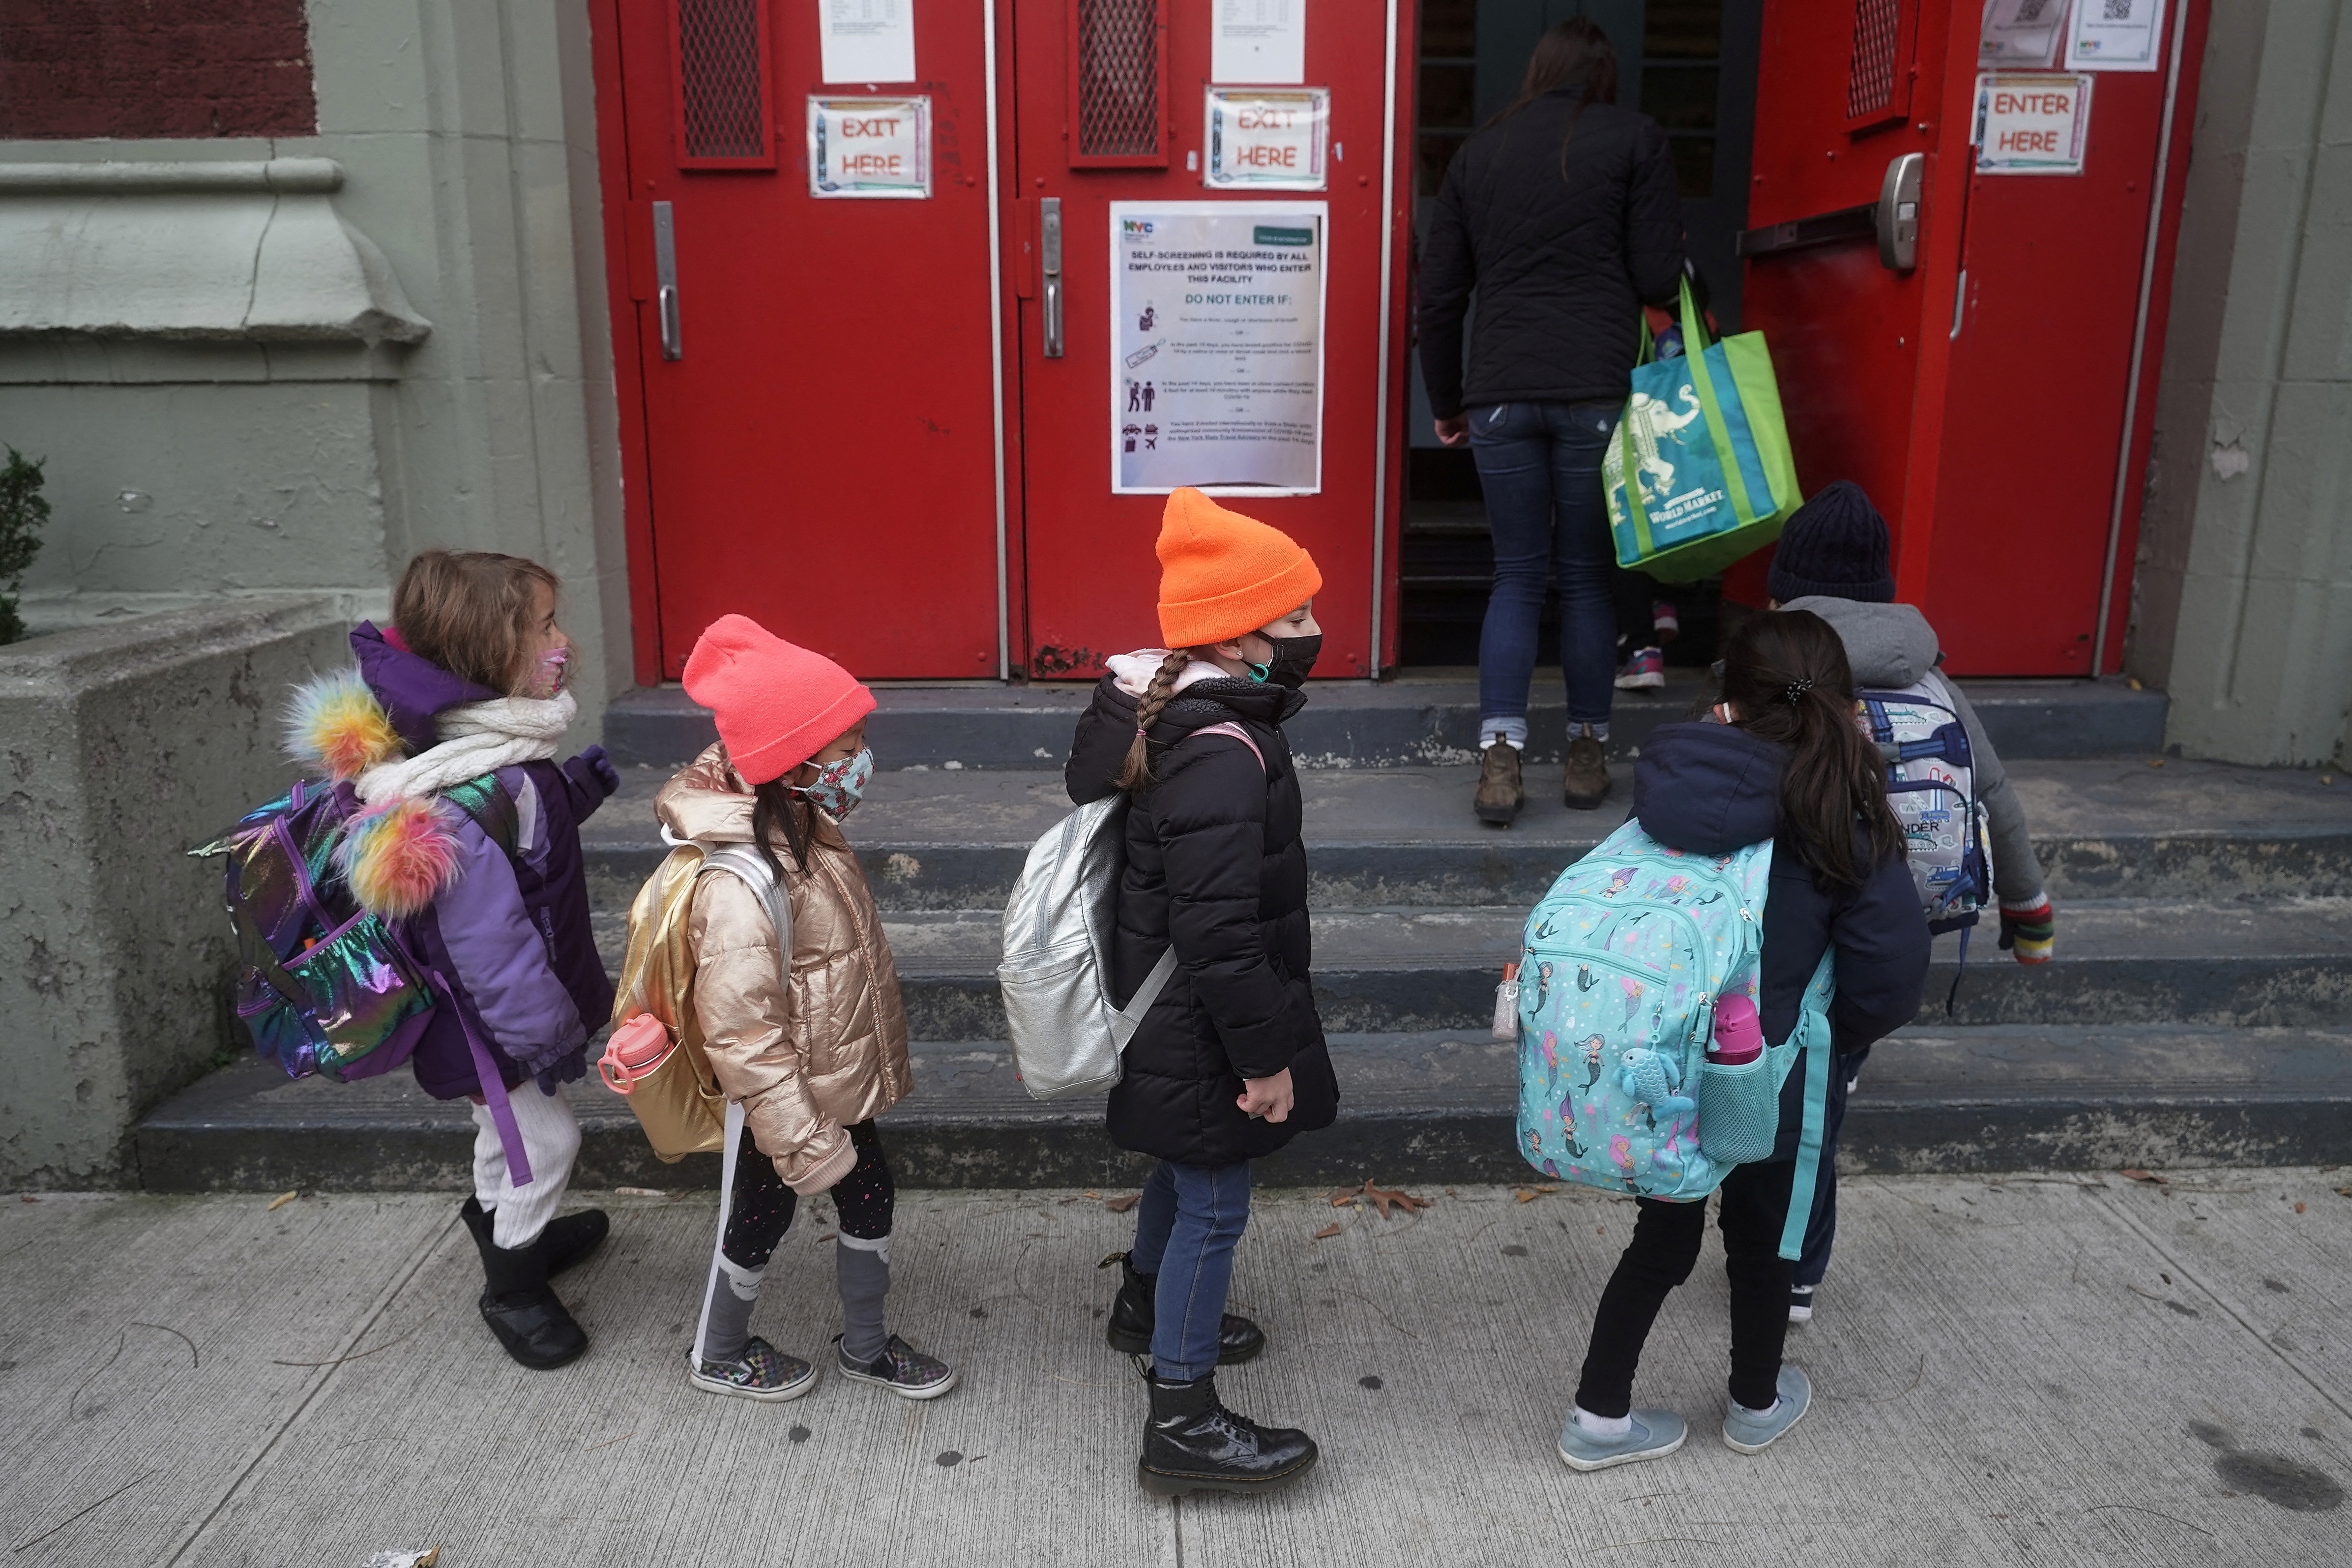 Children line up to attend class at PS 361 on the first day of a return to class during the coronavirus disease (COVID-19) pandemic in the Manhattan borough of New York City, New York, U.S., December 7, 2020. REUTERS/Carlo Allegri/File Photo